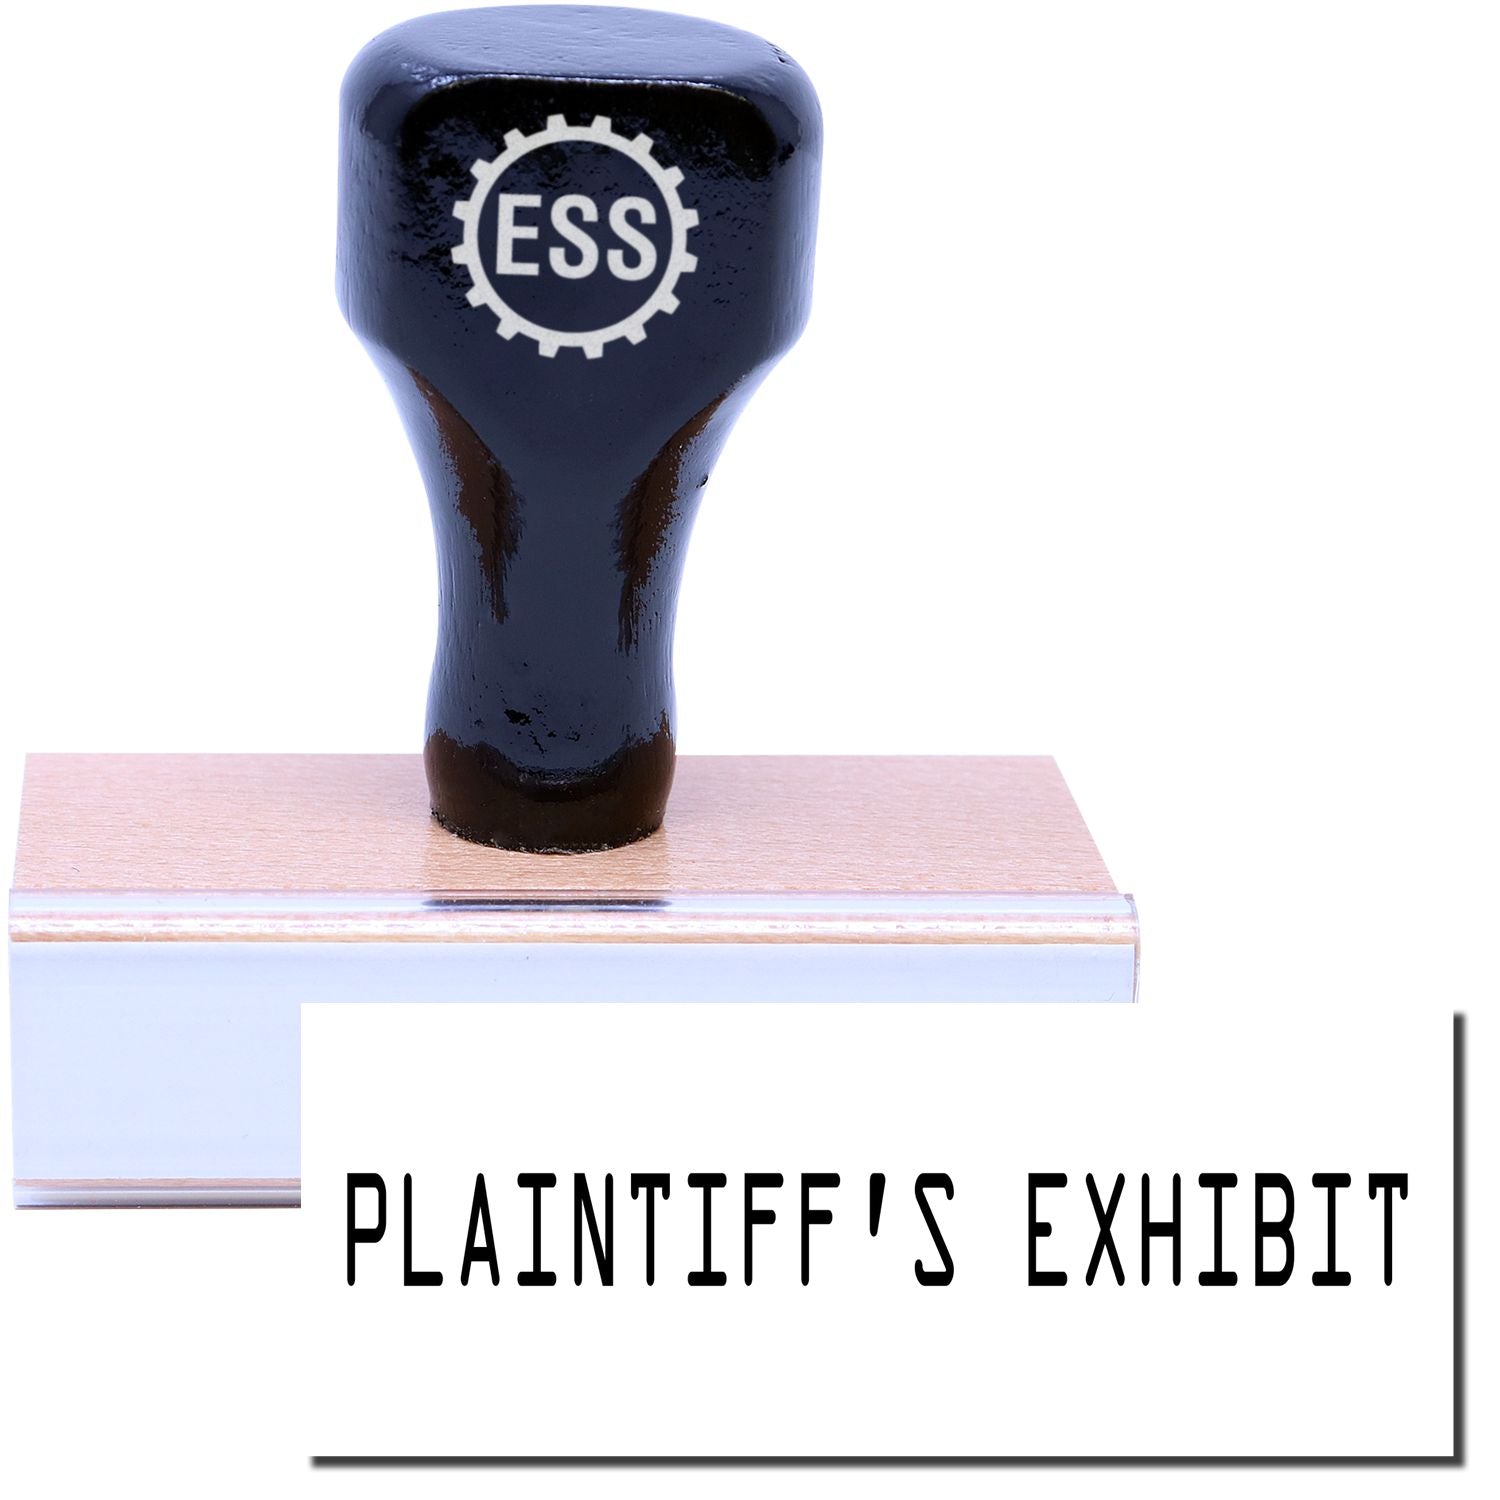 A stock office rubber stamp with a stamped image showing how the text "PLAINTIFF'S EXHIBIT" is displayed after stamping.